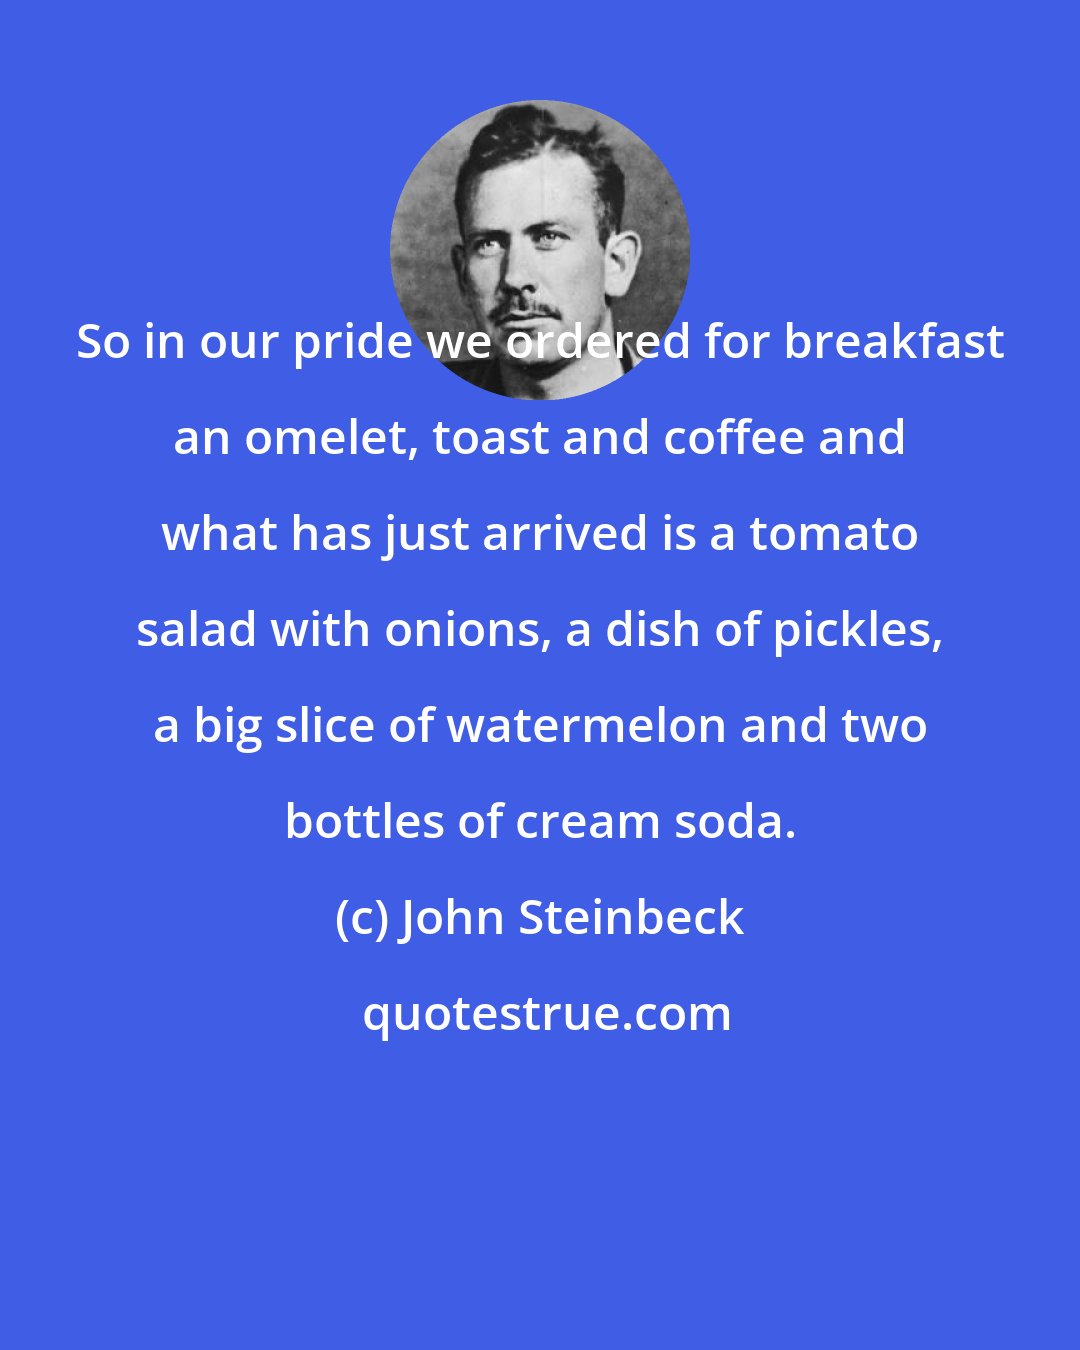 John Steinbeck: So in our pride we ordered for breakfast an omelet, toast and coffee and what has just arrived is a tomato salad with onions, a dish of pickles, a big slice of watermelon and two bottles of cream soda.